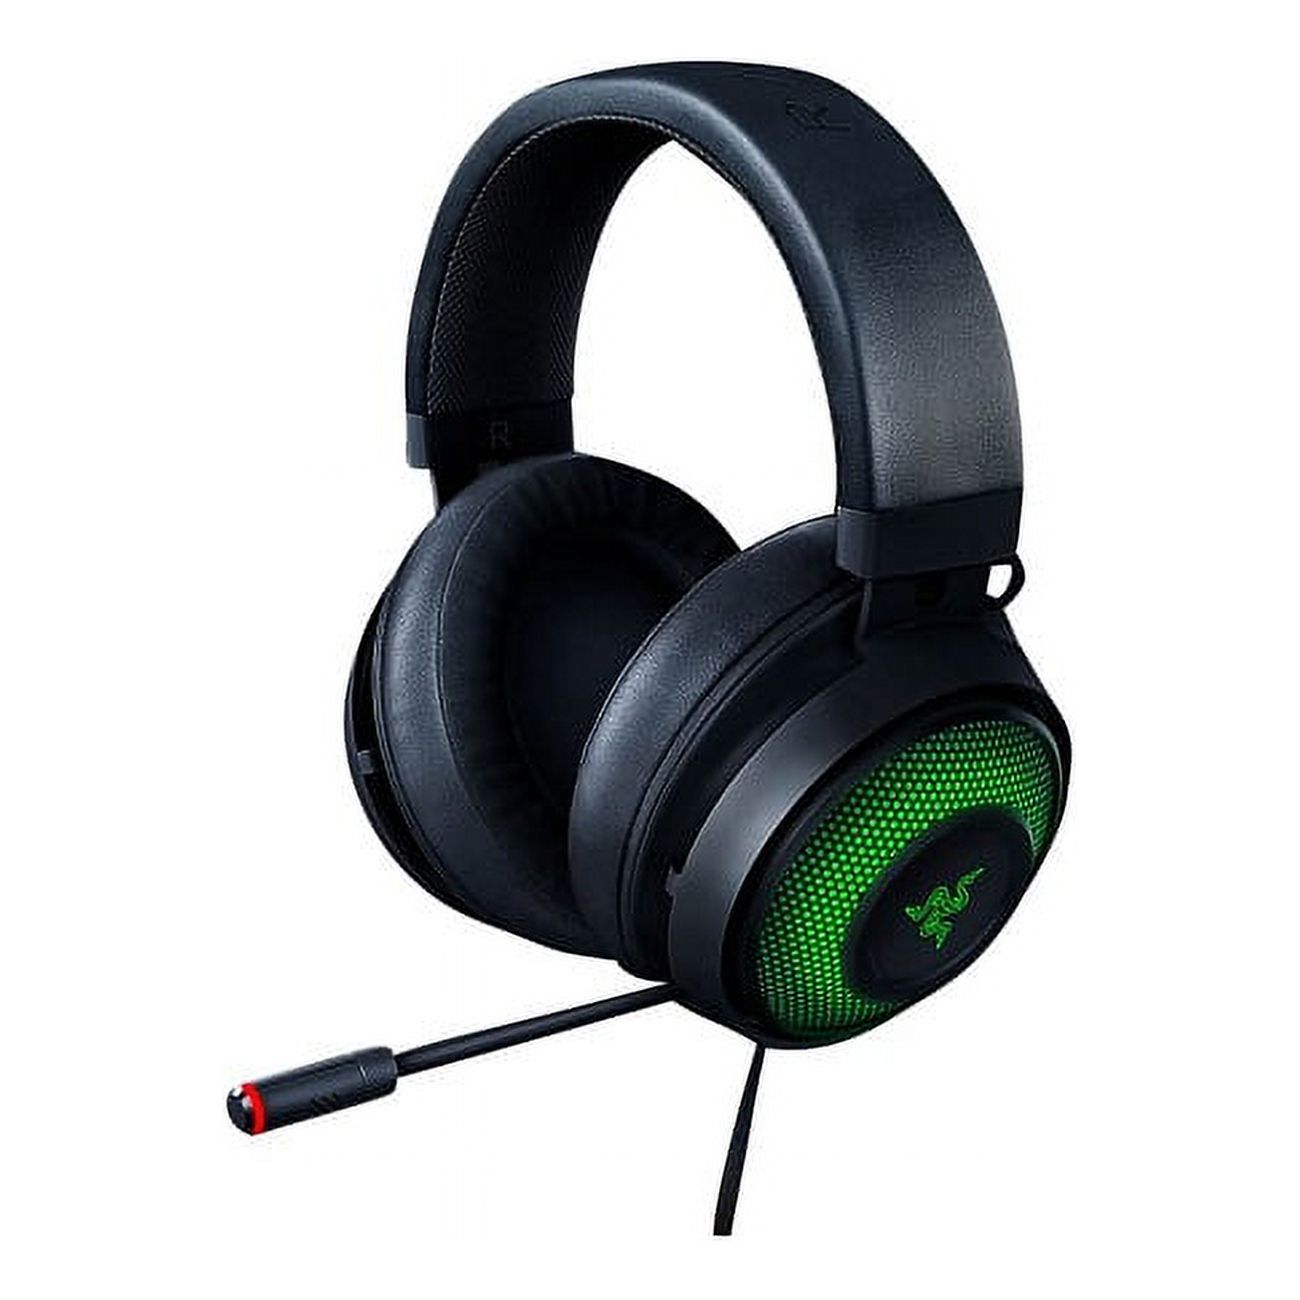 Razer Kraken Ultimate USB Surround Sound Headset with ANC Microphone - image 1 of 3